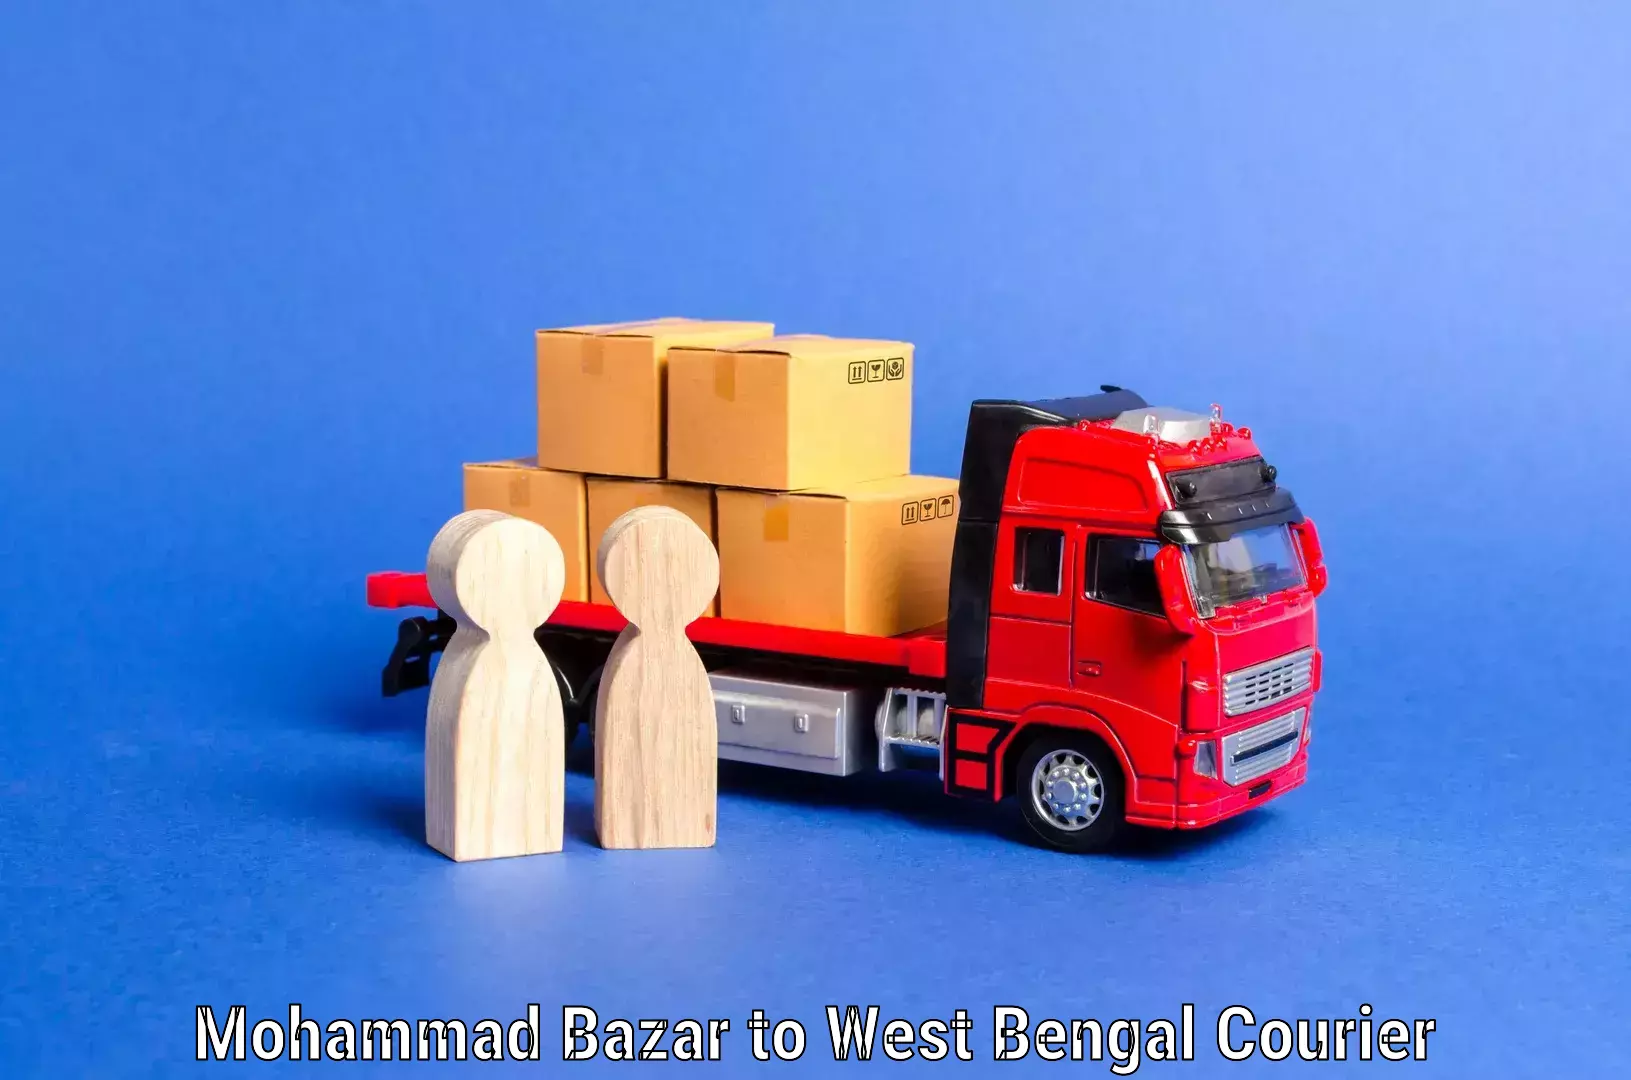 Furniture moving experts Mohammad Bazar to West Bengal